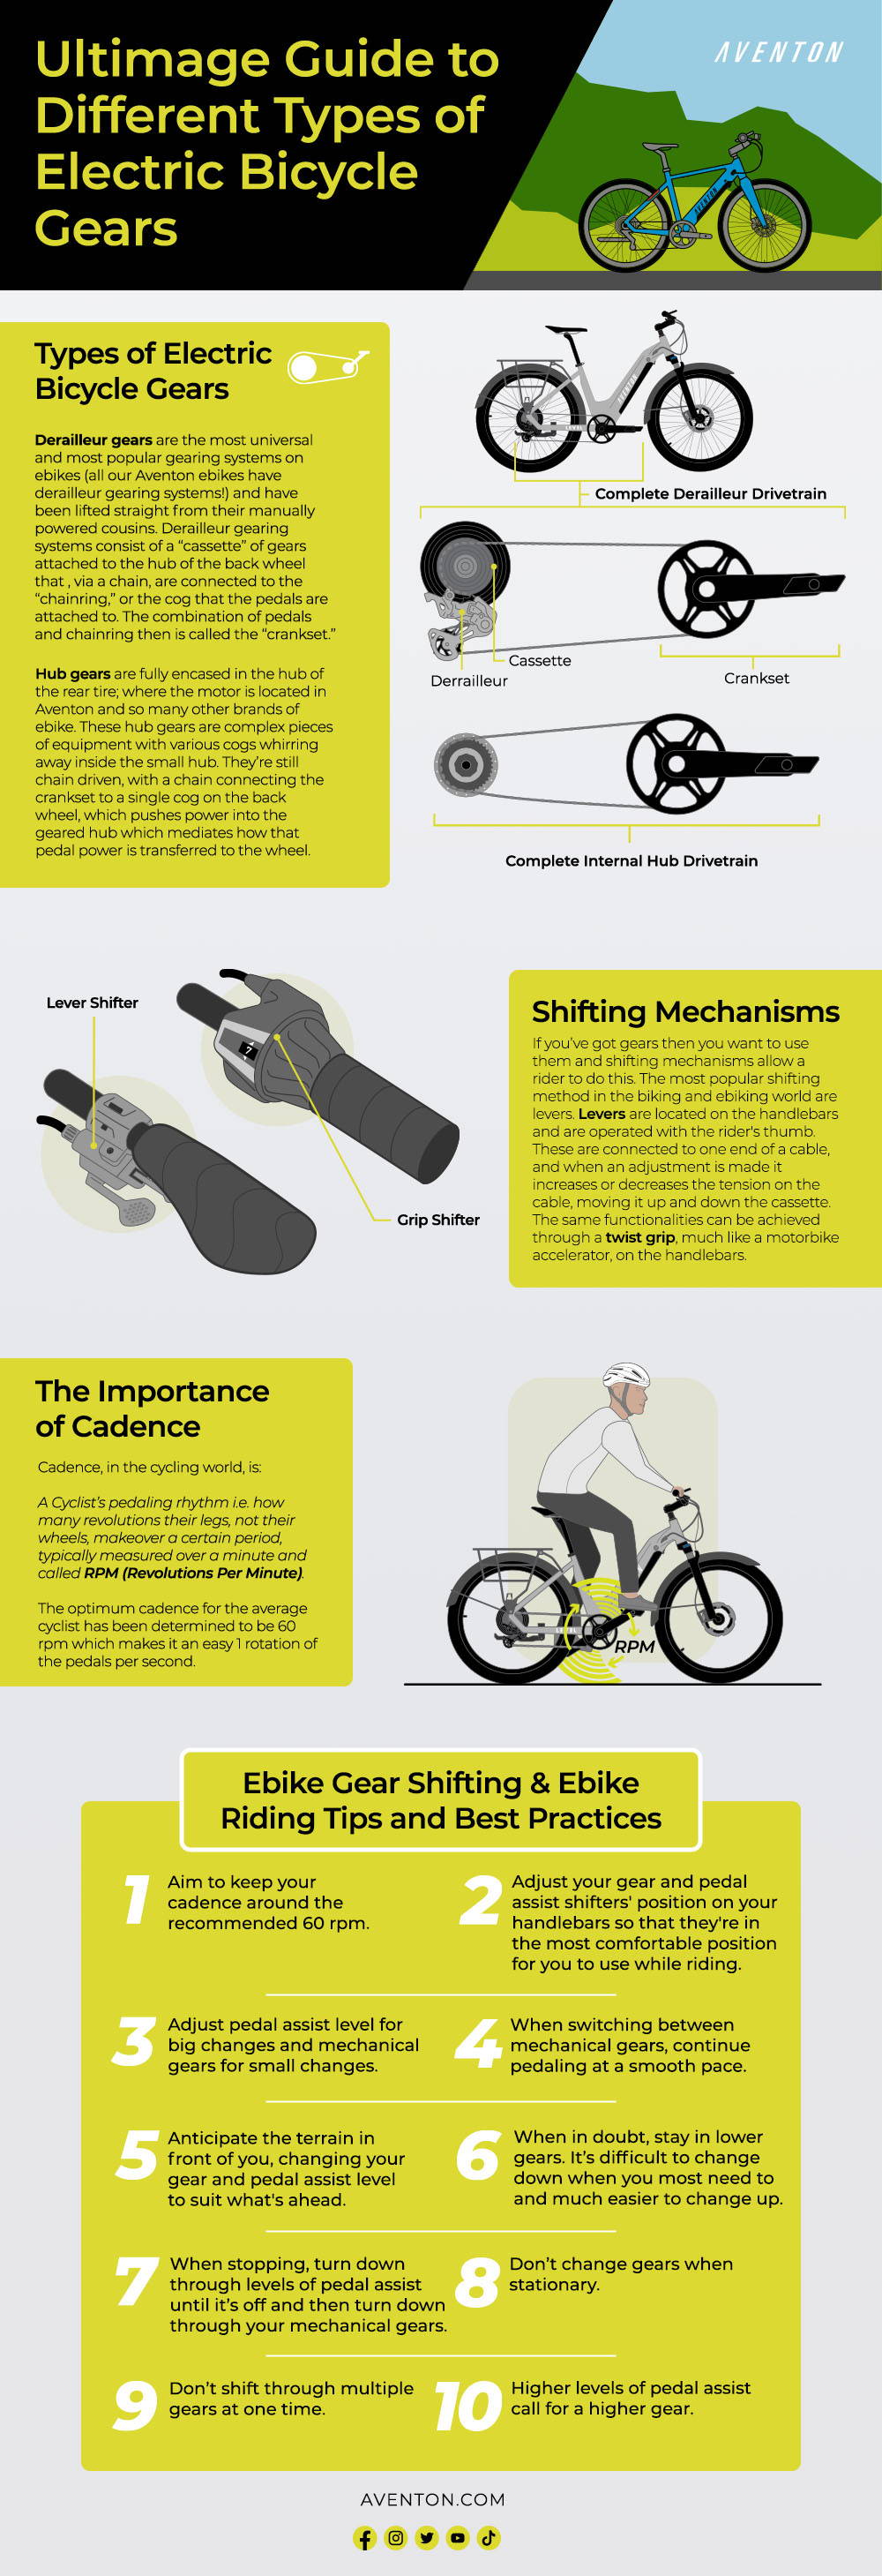 An overview of Aventon's ultimate guide to different types of electric bicycle gears.